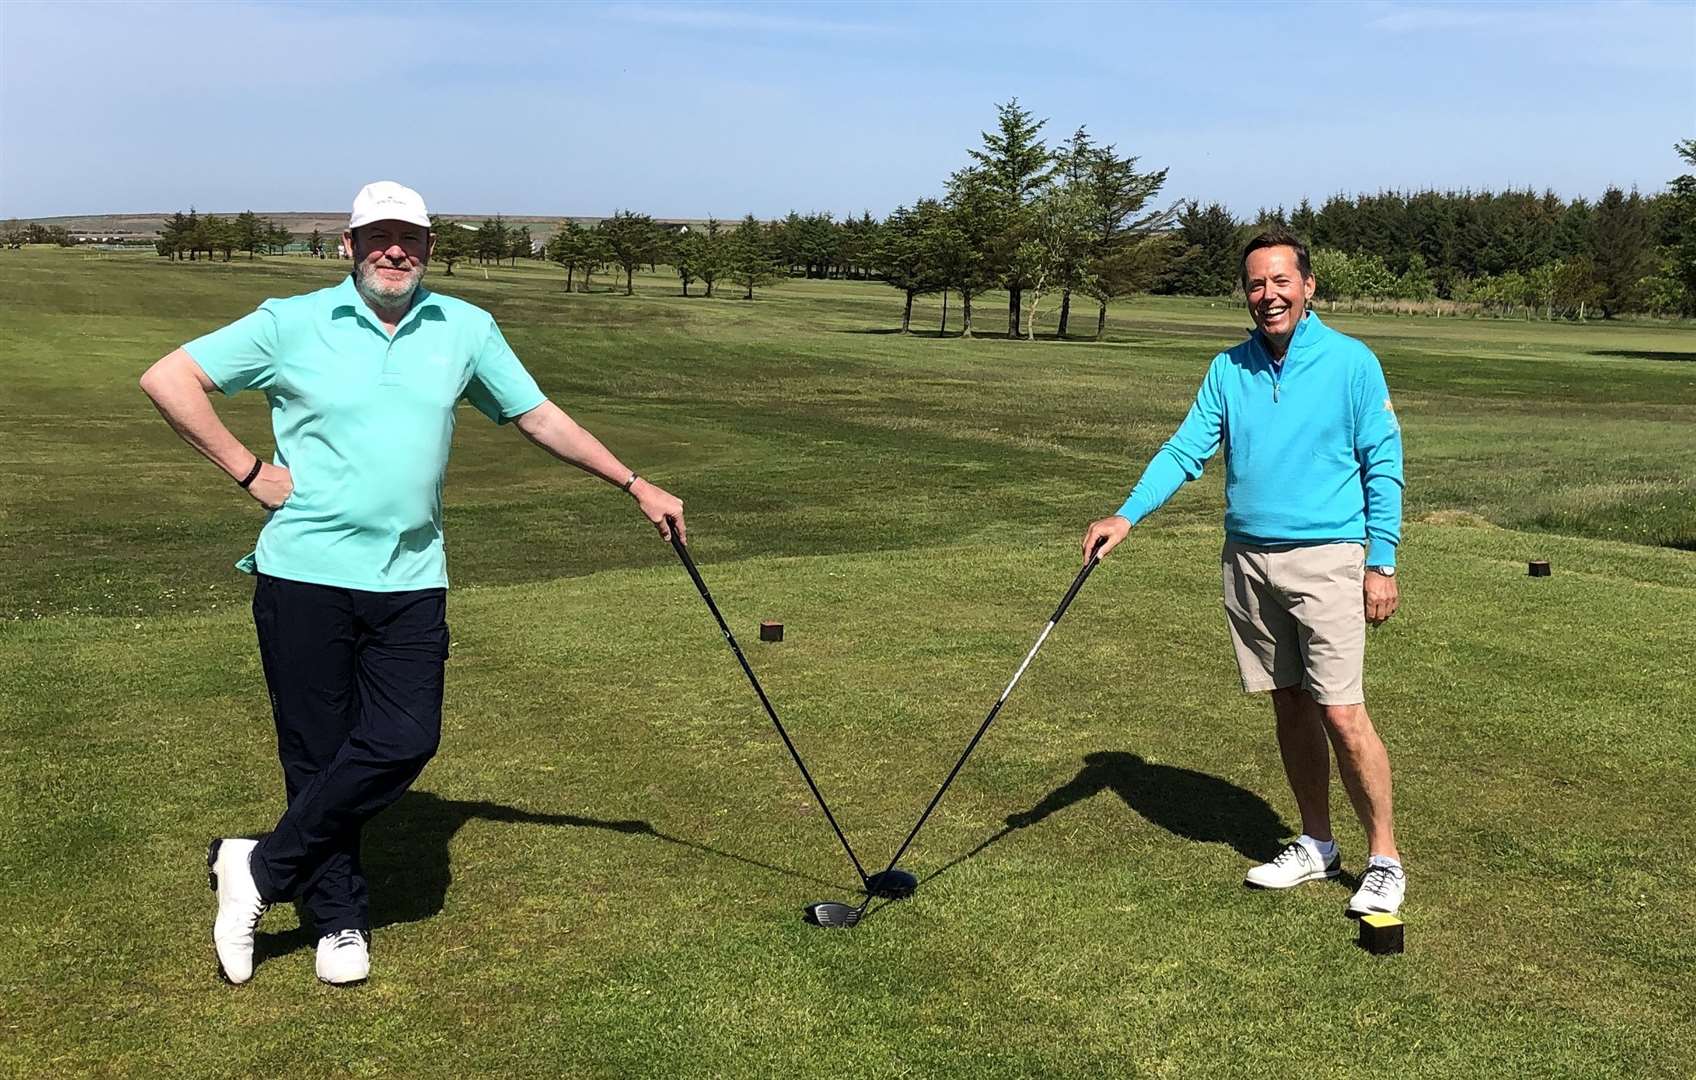 Thurso Golf Club's captain Alan Coghill (right) and vice-captain James Taylor on the first tee and observing social distancing.